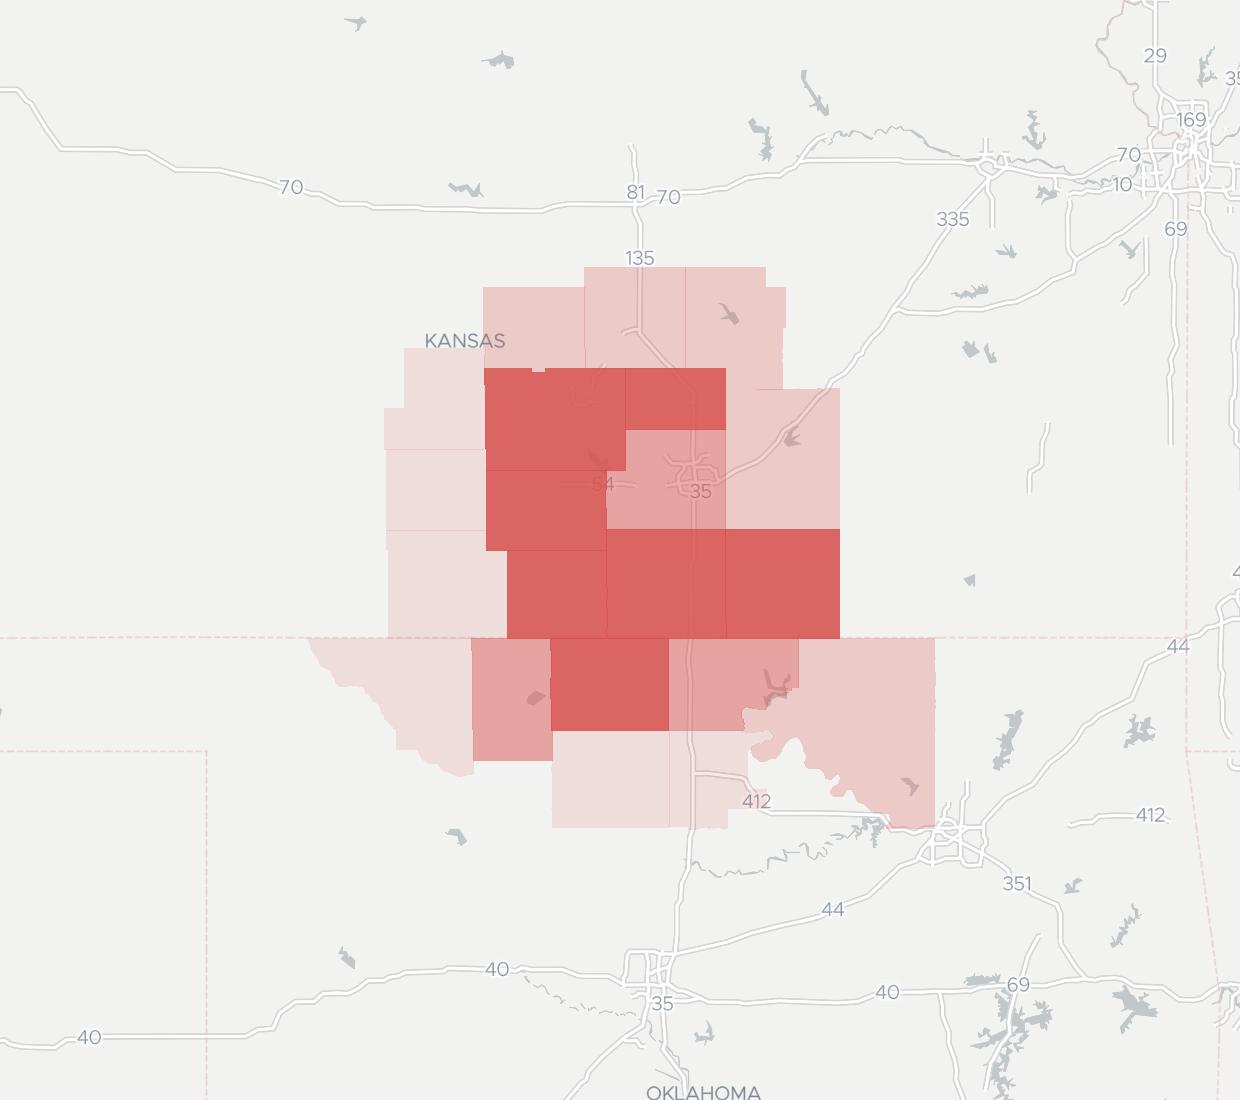 KanOkla Networks Availability Map. Click for interactive map.